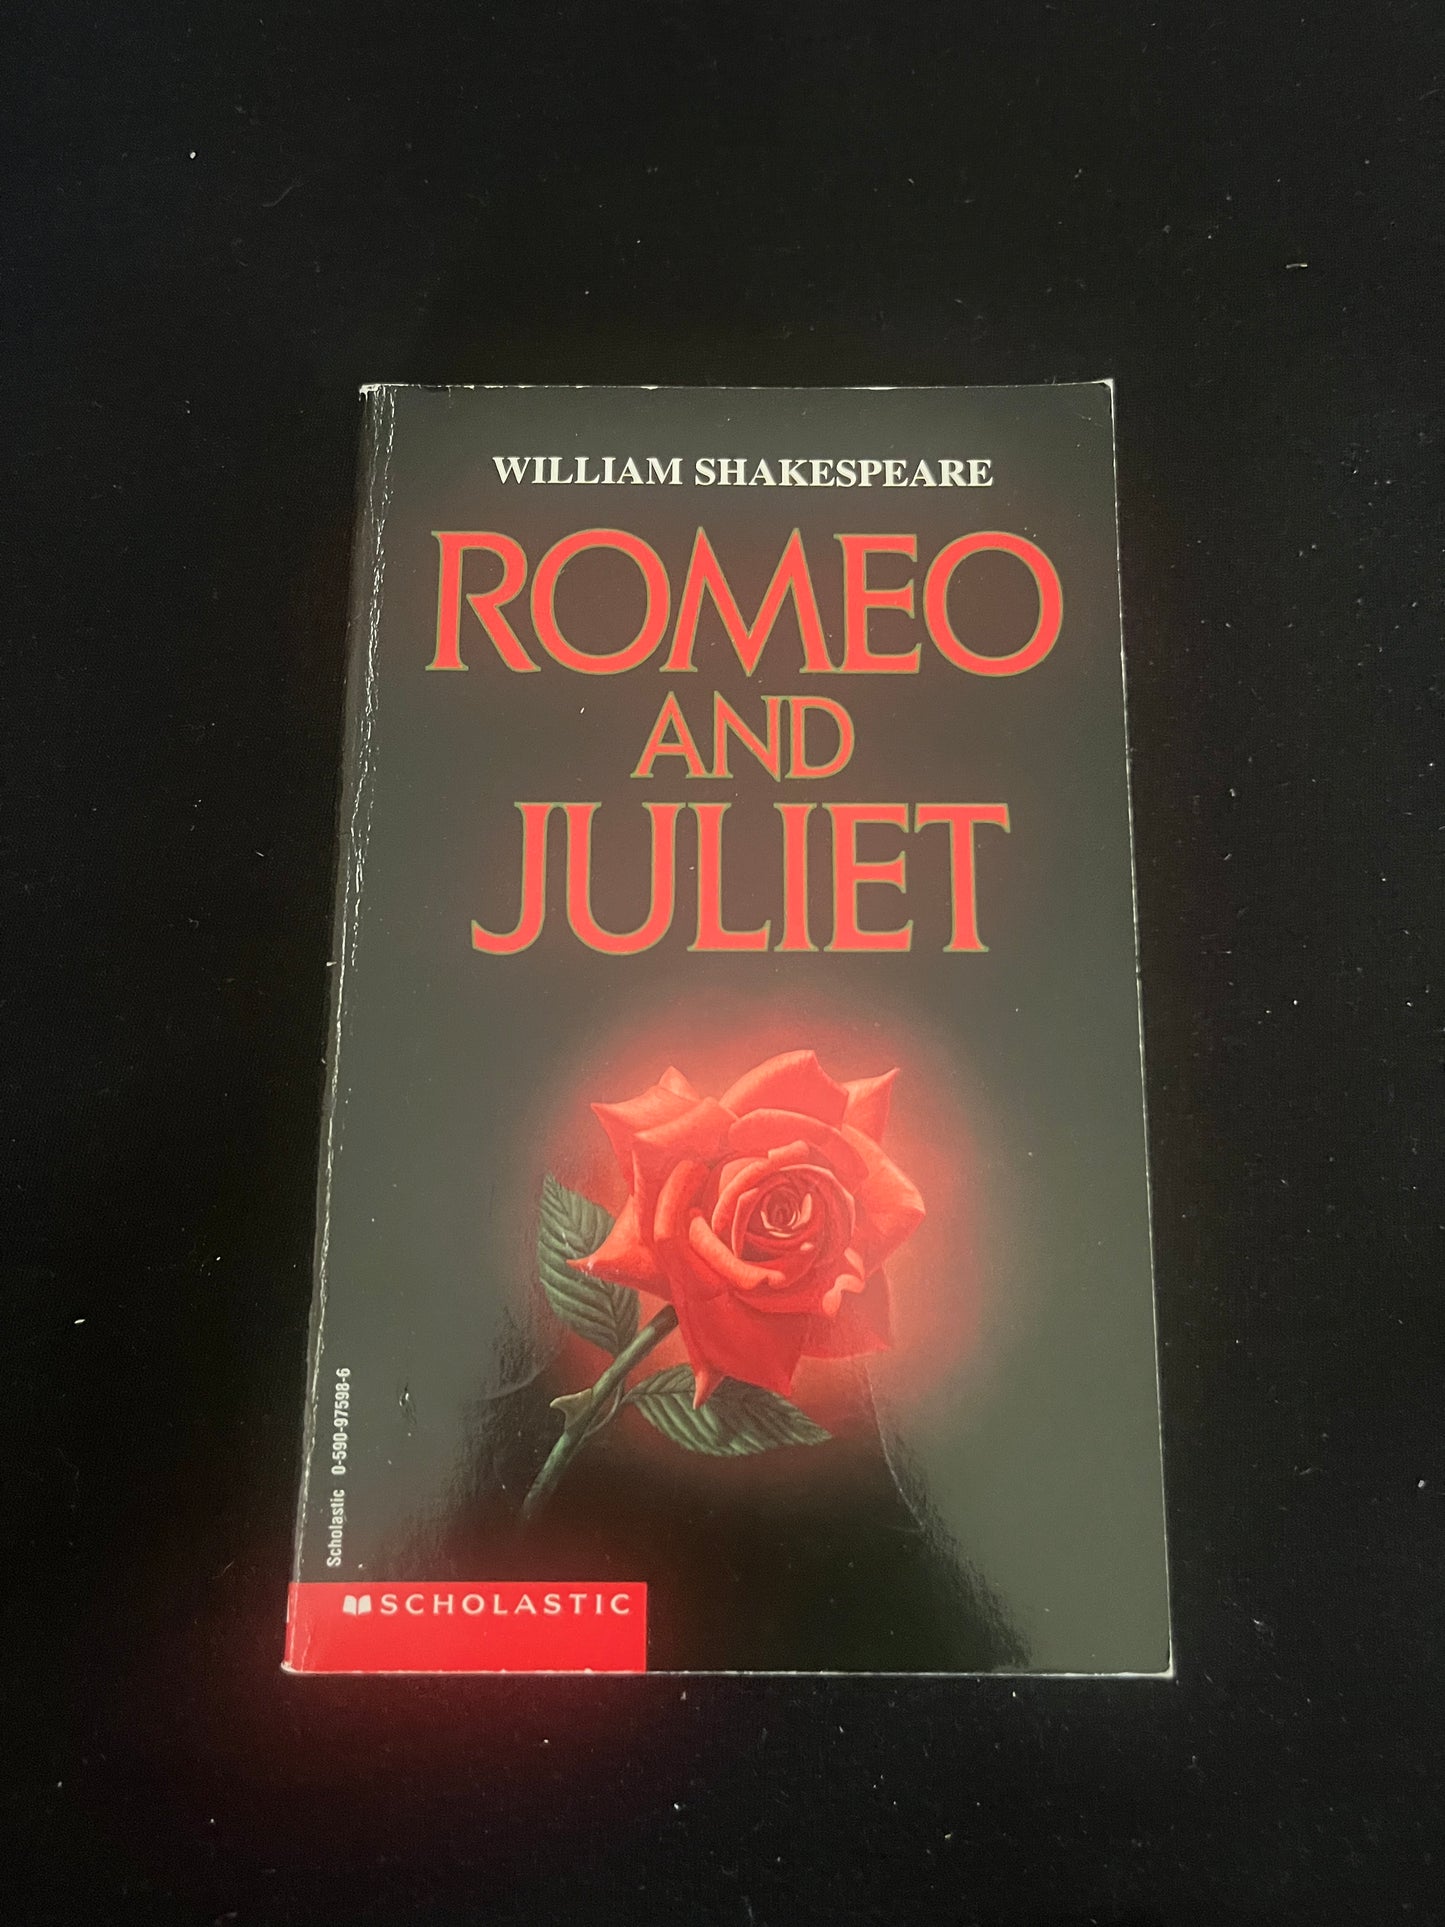 ROMEO AND JULIET by William Shakespeare